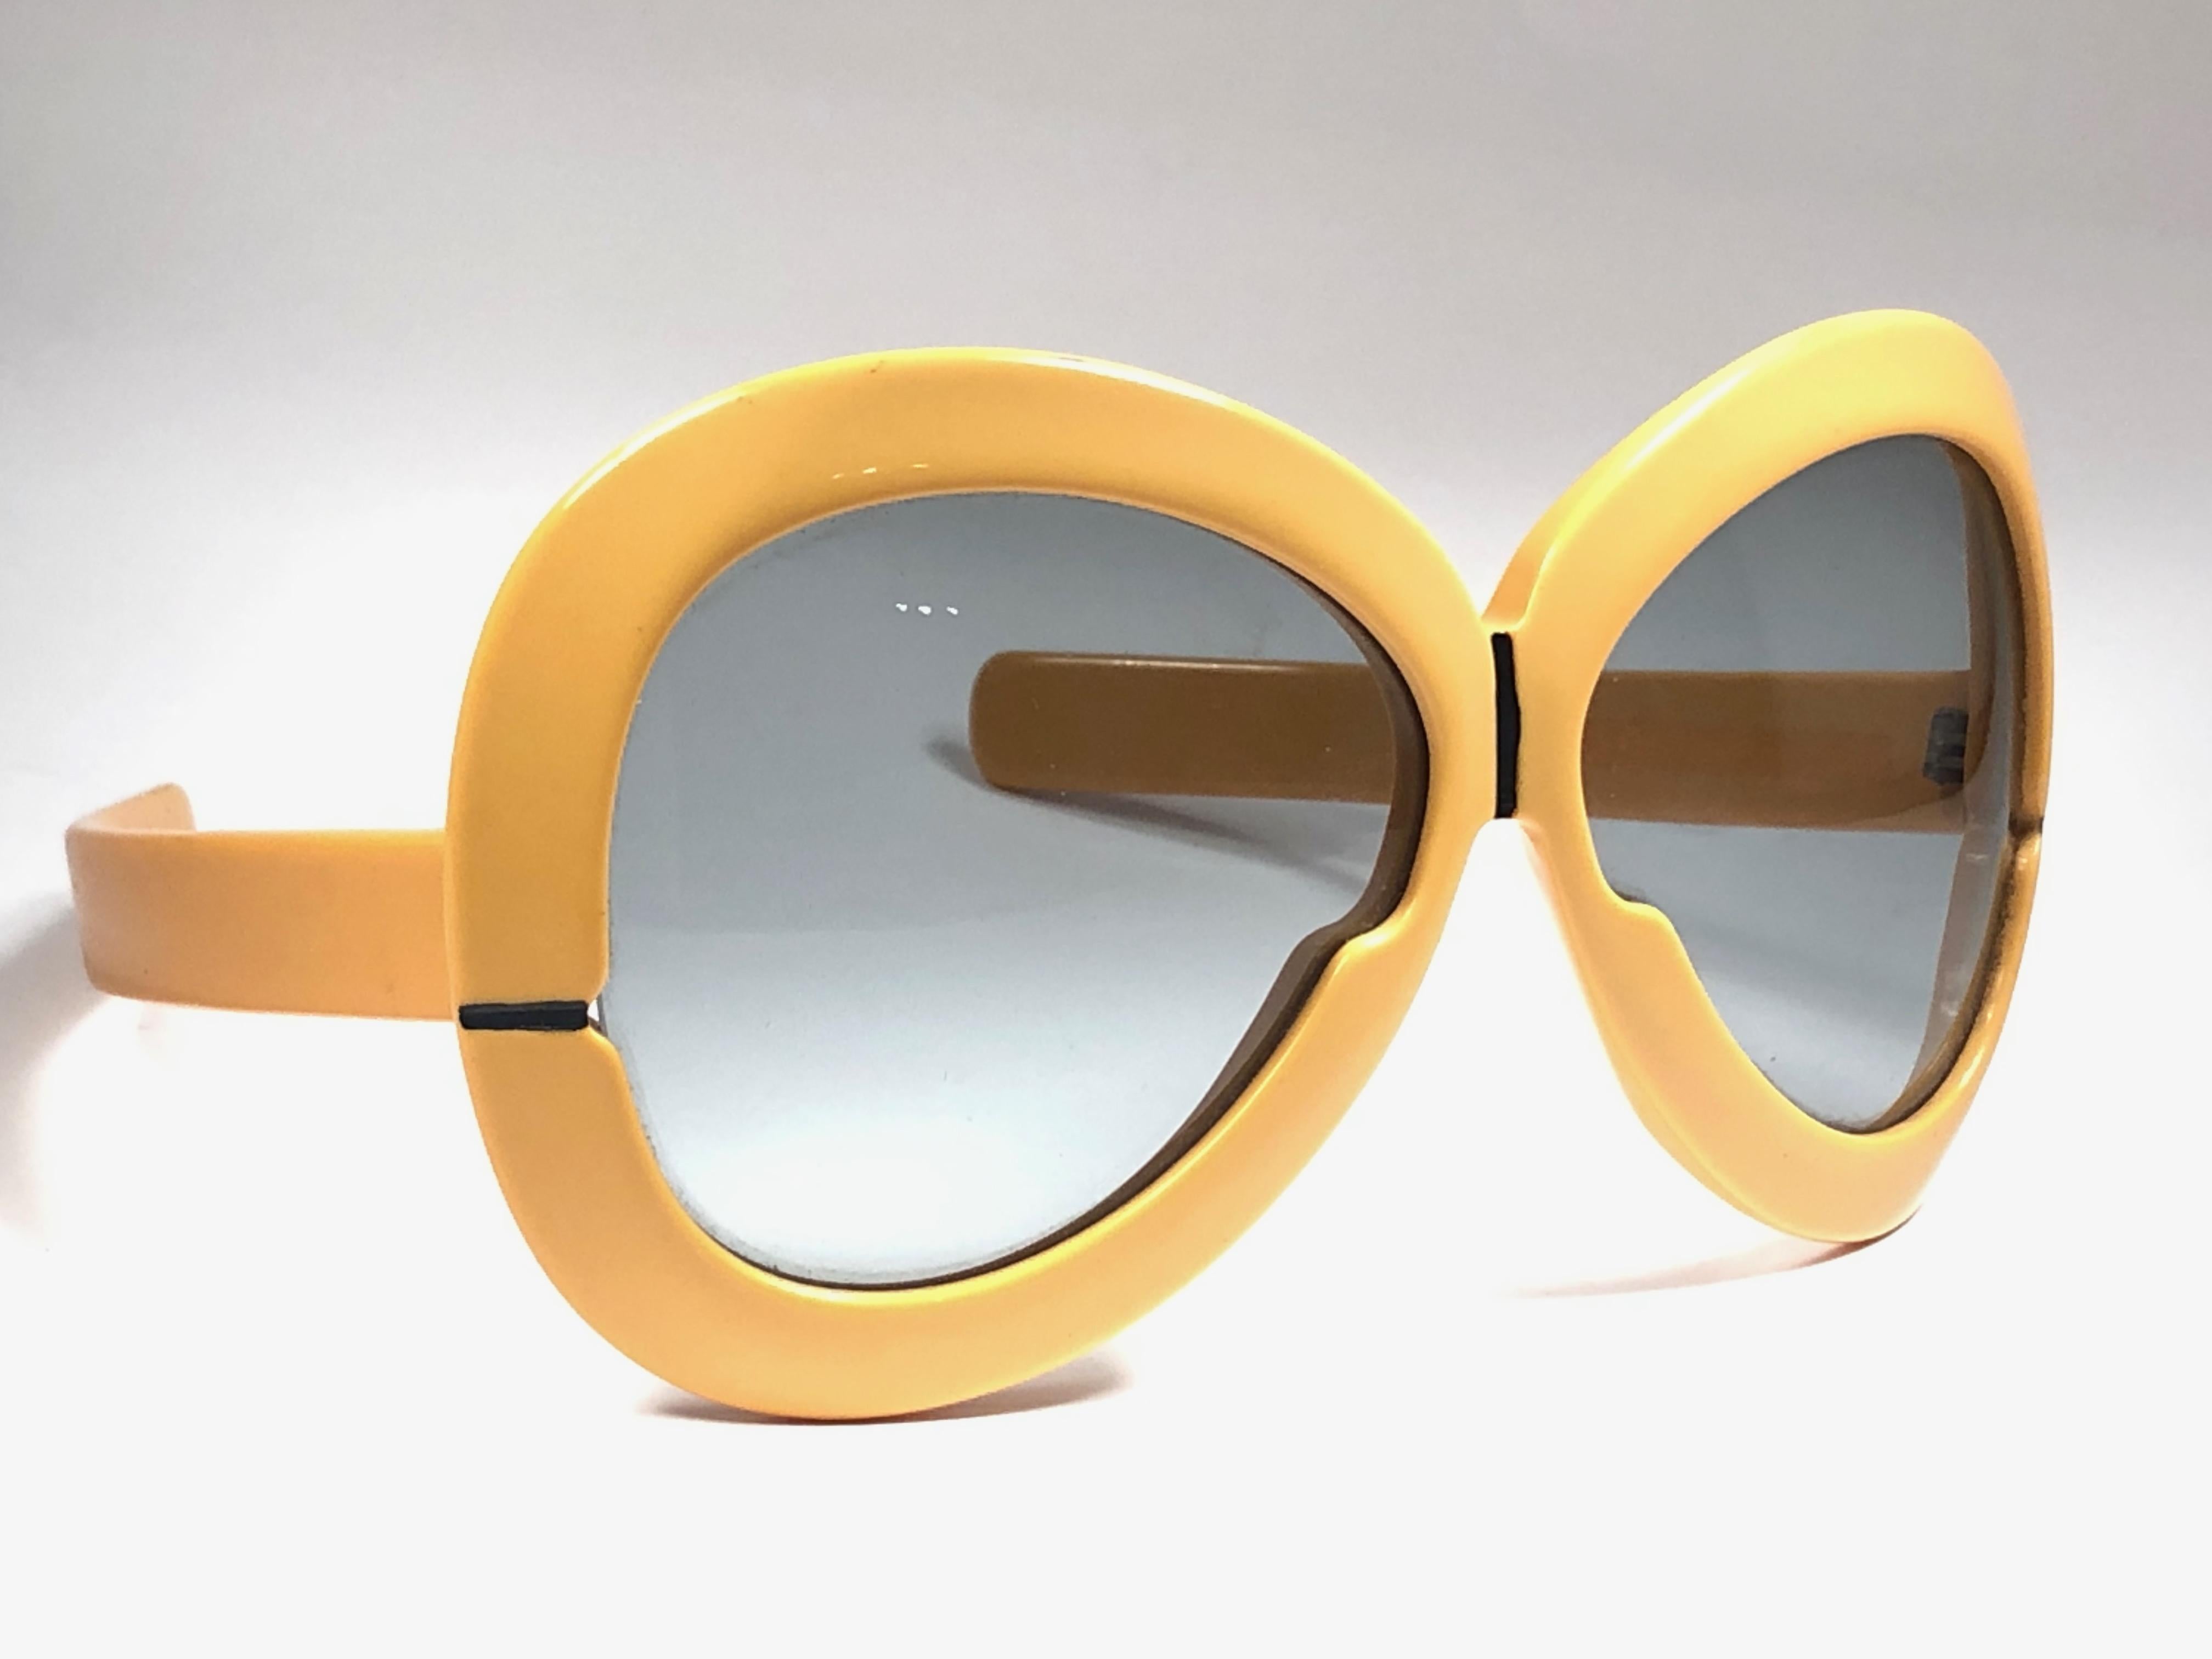 New Vintage Collector Item Silhouette Futura 561 ochre thick frame with holding a spotless pair of light lenses.   

Designed by Dora Demmel in 1973, this rare piece is the epitome of avant garde & futuristic eye wear fashion.

Made in Germany in